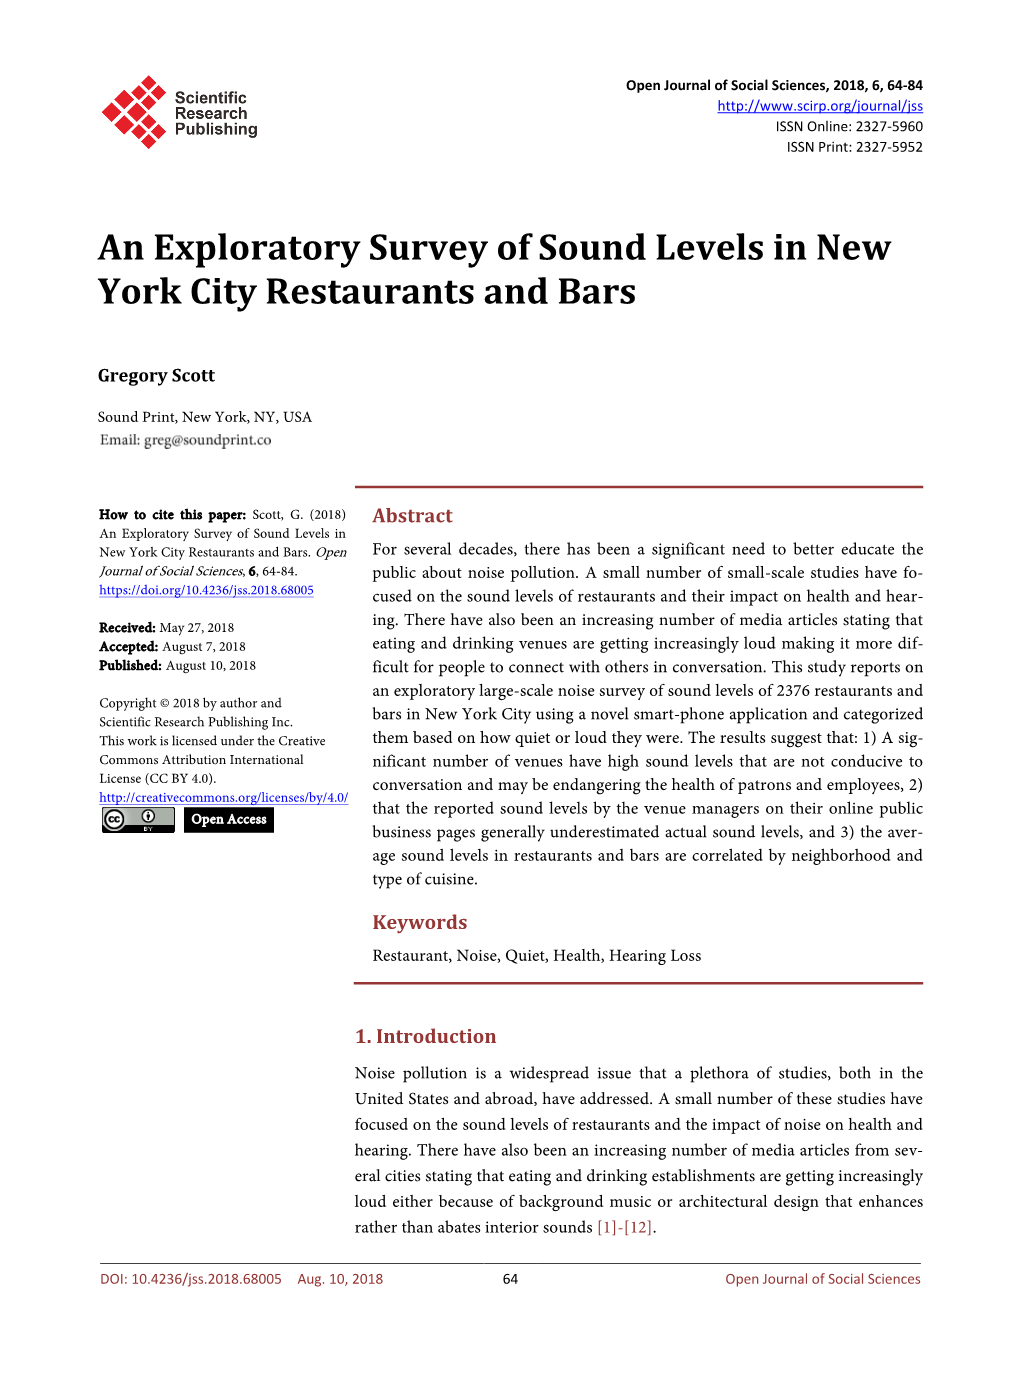 An Exploratory Survey of Sound Levels in New York City Restaurants and Bars